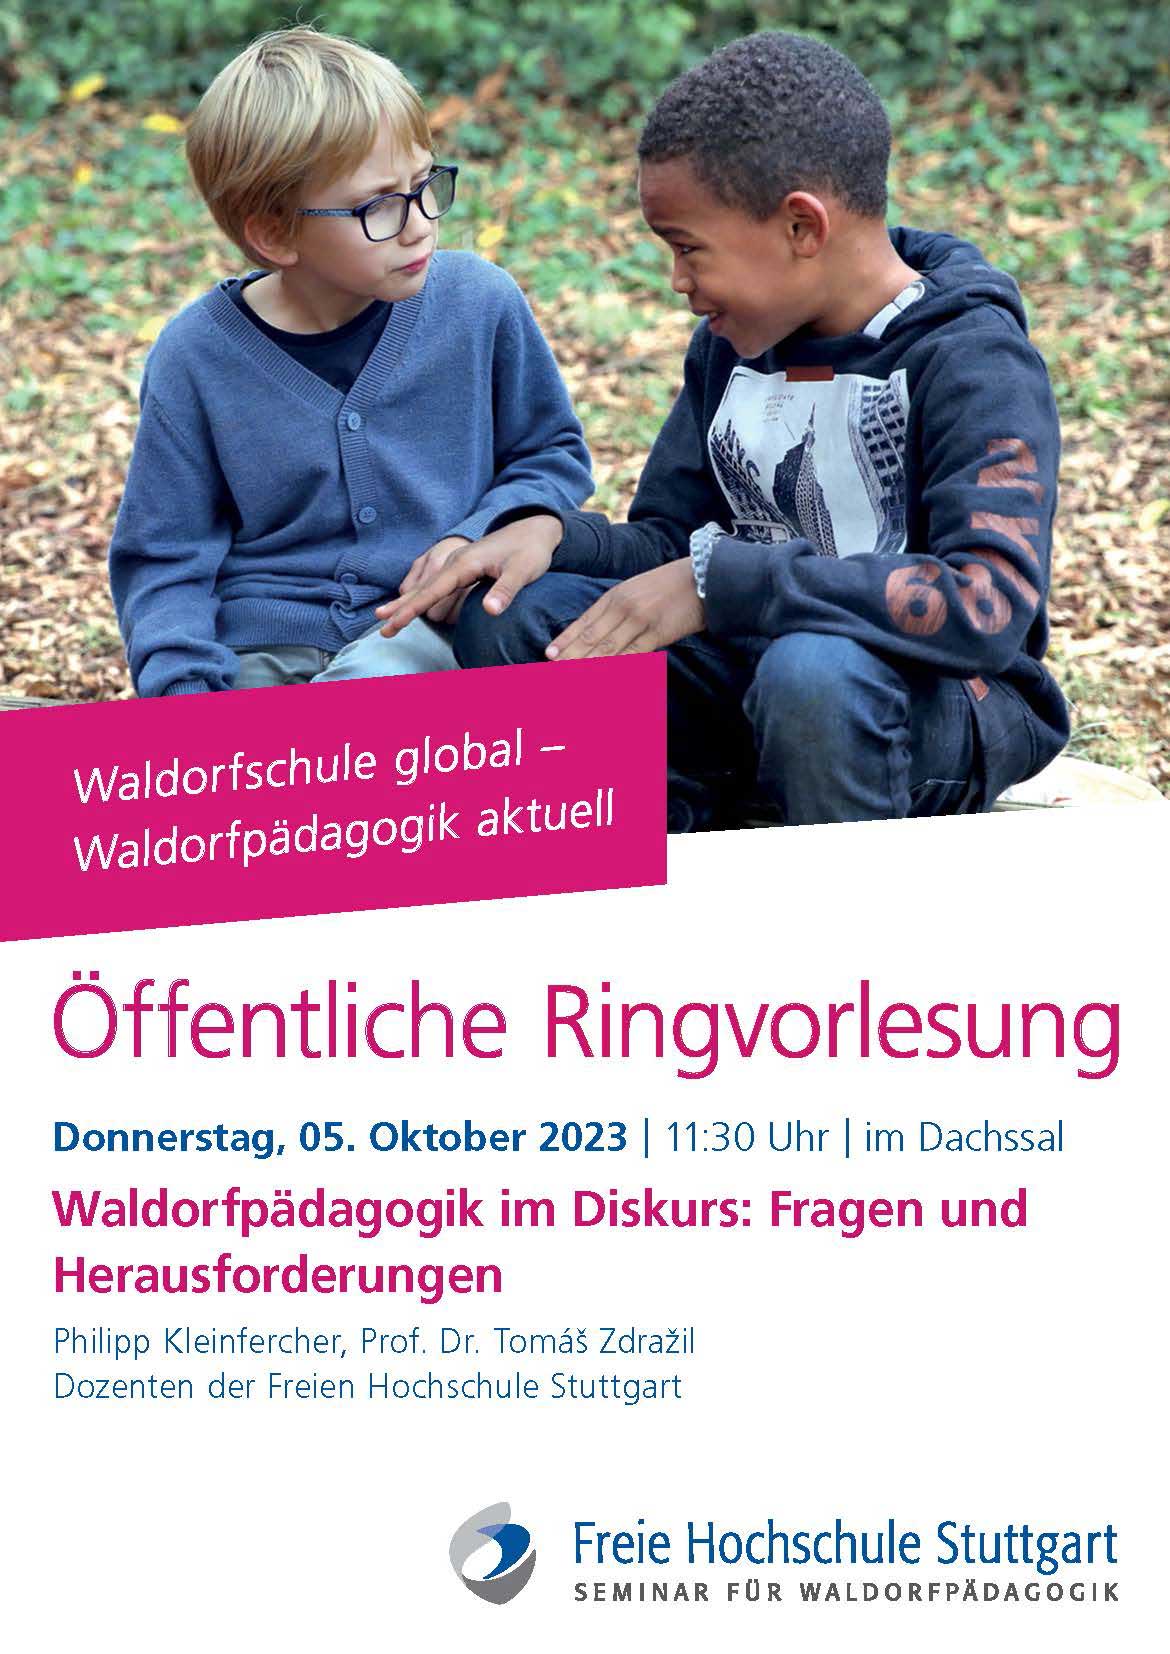 FHS A3 Ringvorlesung fuer 051023